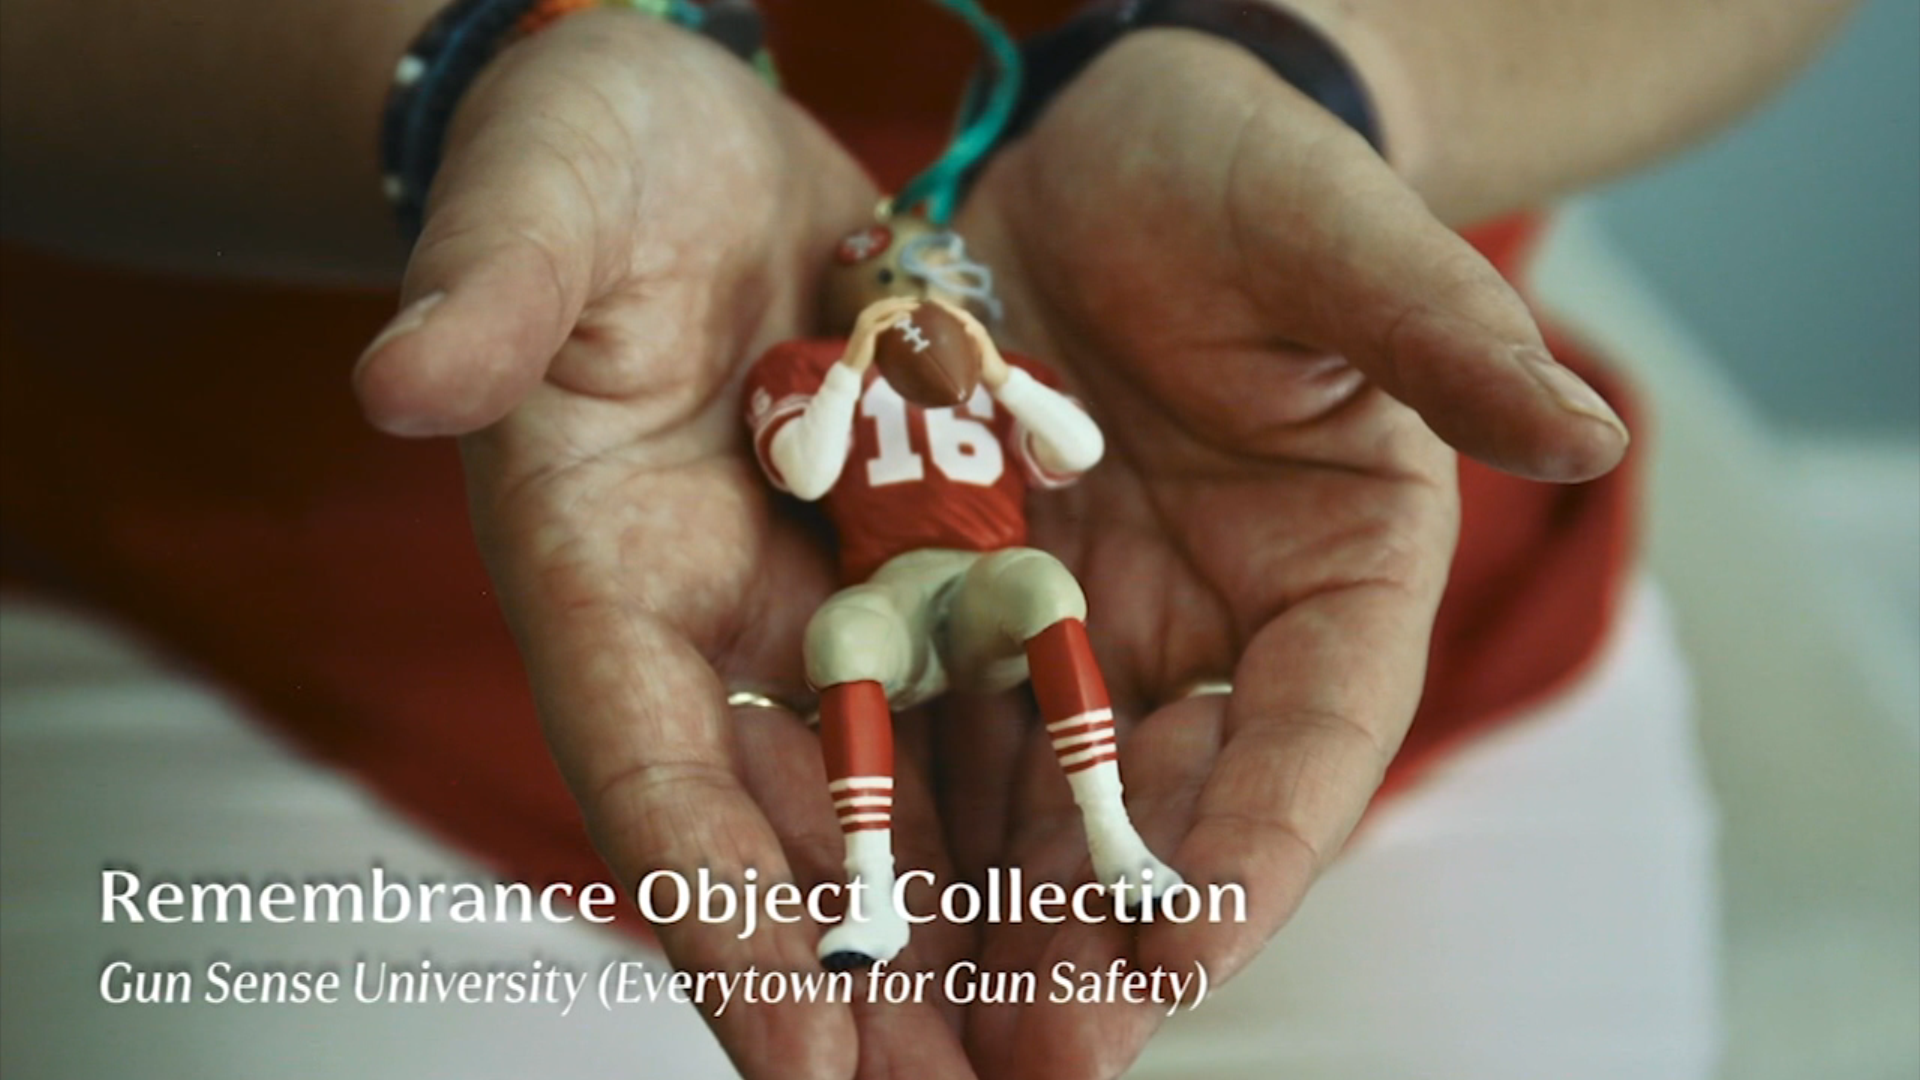 Museum In Washington D.C. Set To Display Personal Items That Belonged To Gun Violence Victims